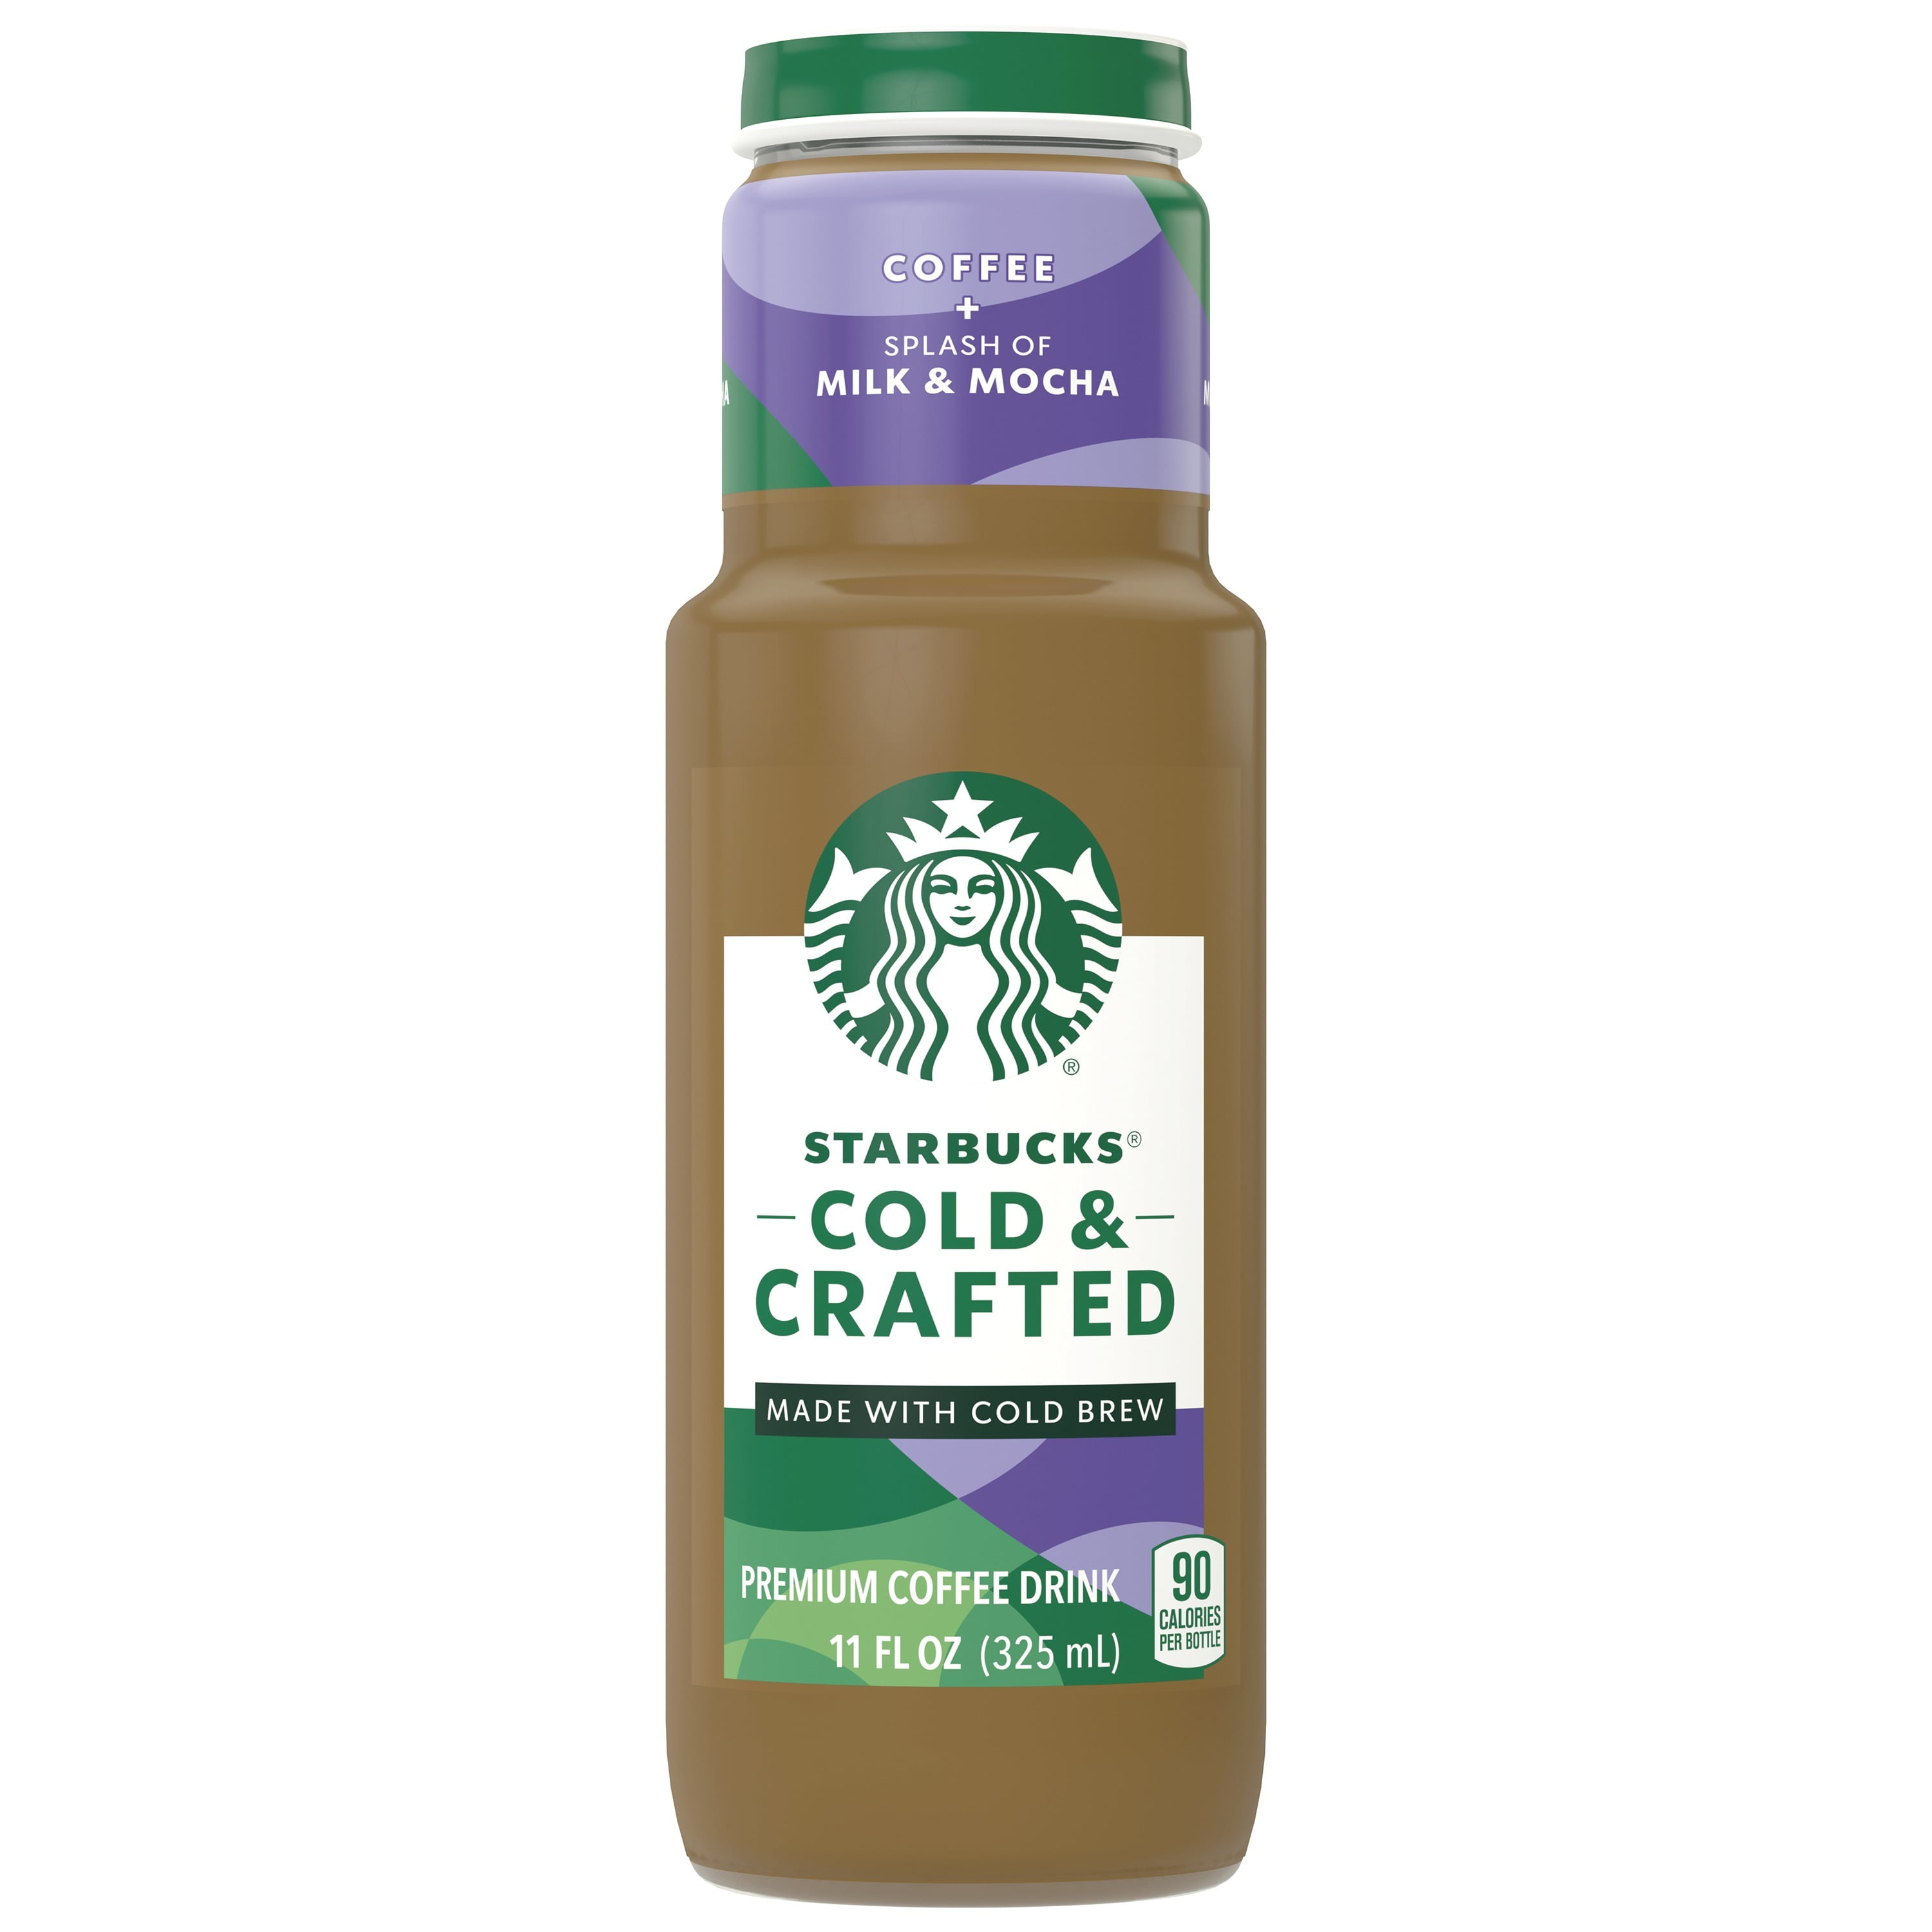 Starbucks Cold & Crafted Coffee + Splash of Milk & Mocha Cold Brew Crafted Coffee, 11 oz Bottle